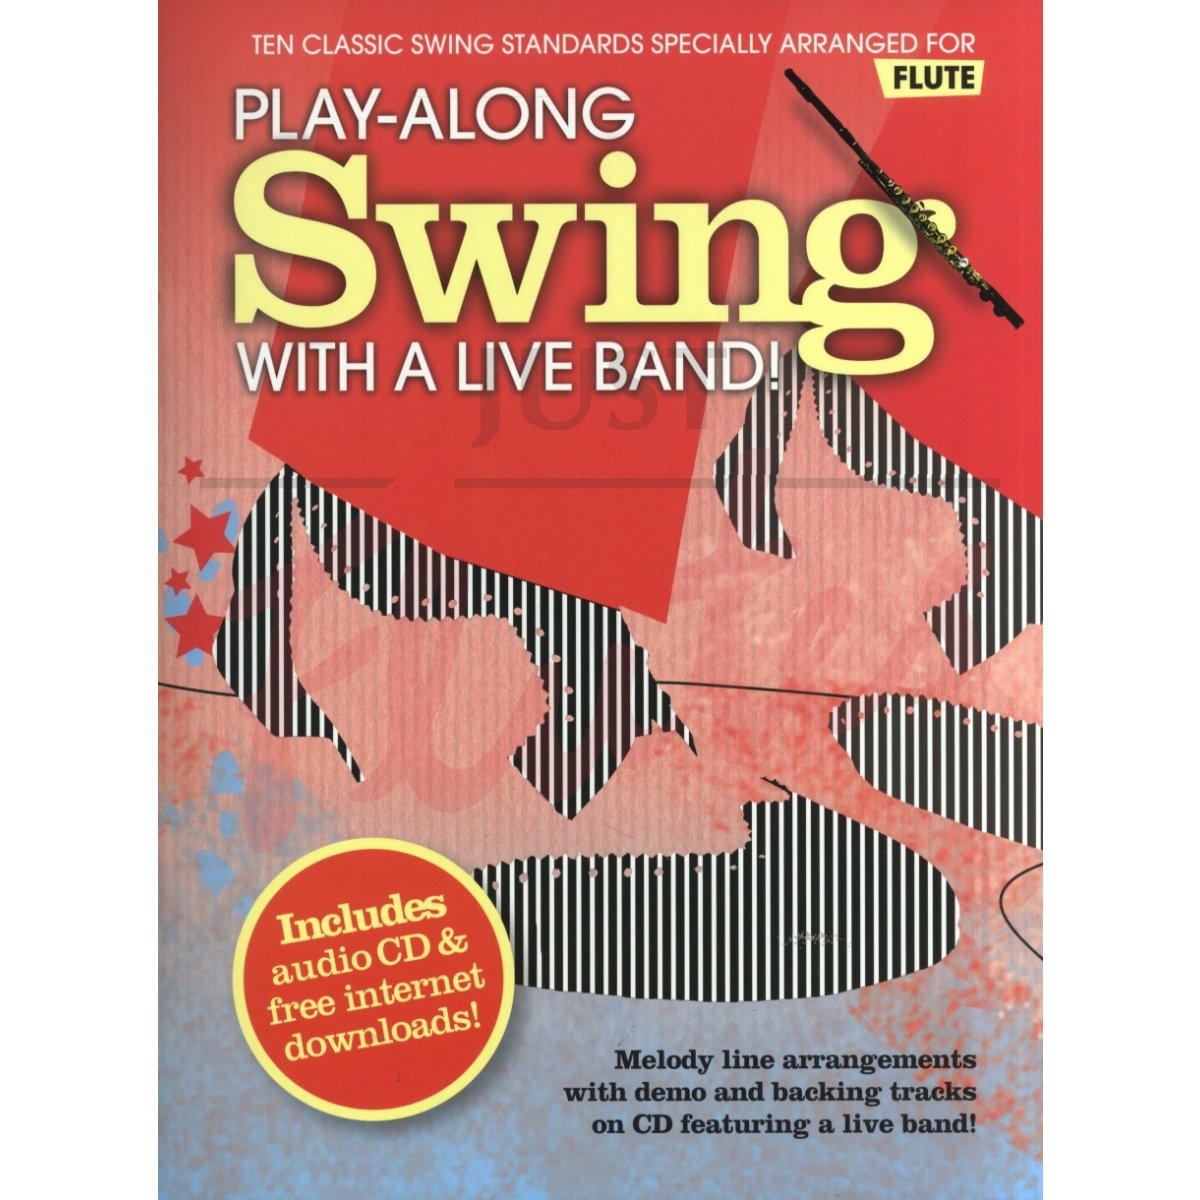 Play-Along Swing With a Live Band! [Flute]